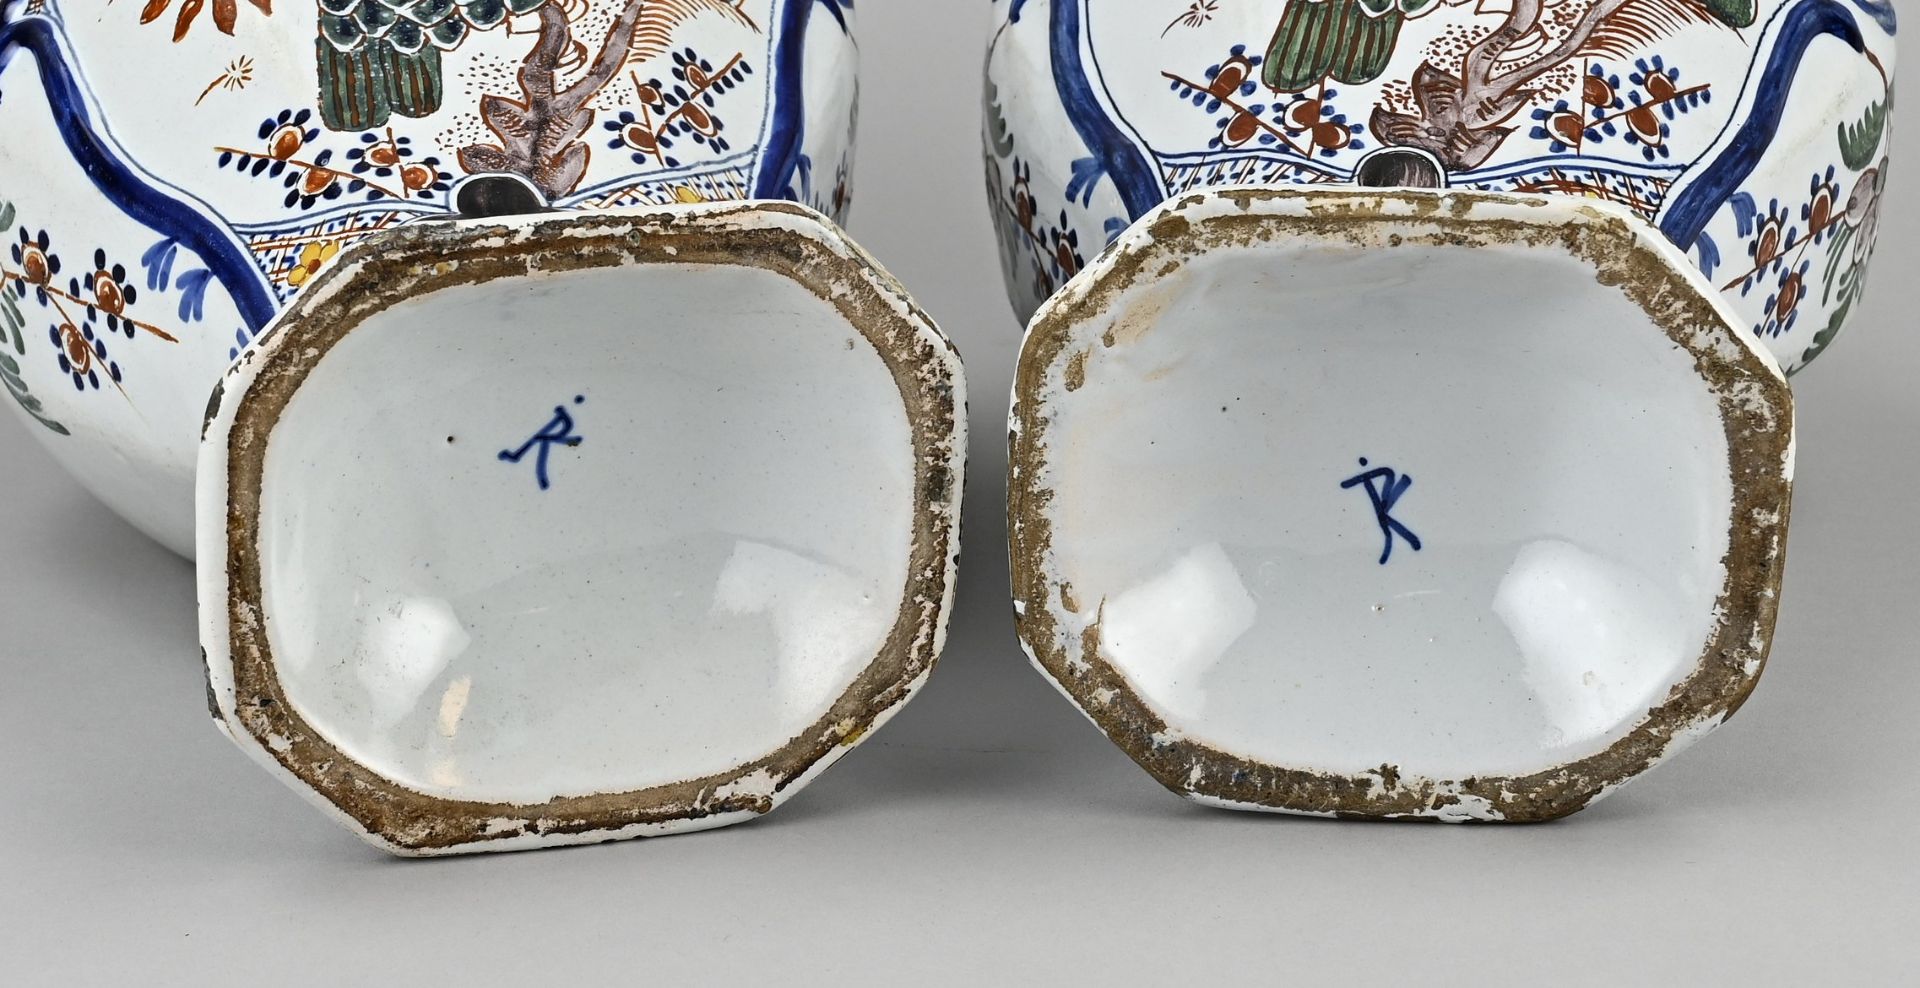 Two 18th century lidded vases, H 40 cm. - Image 2 of 2